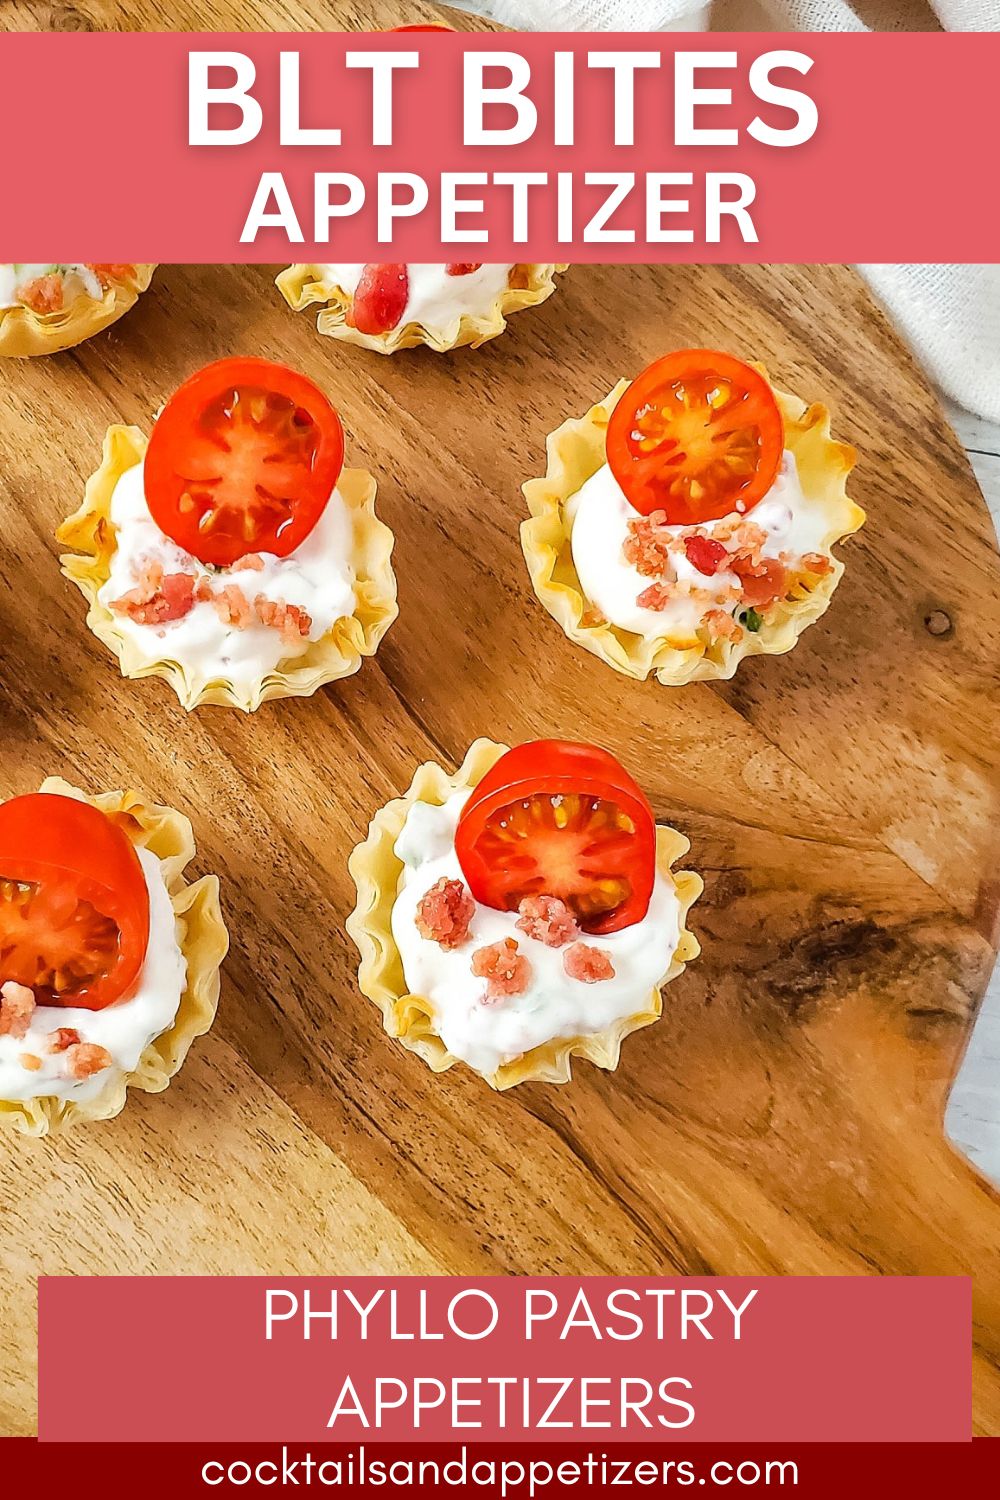 BLT Bites with cherry tomato garnish in phyllo shell on wood table.